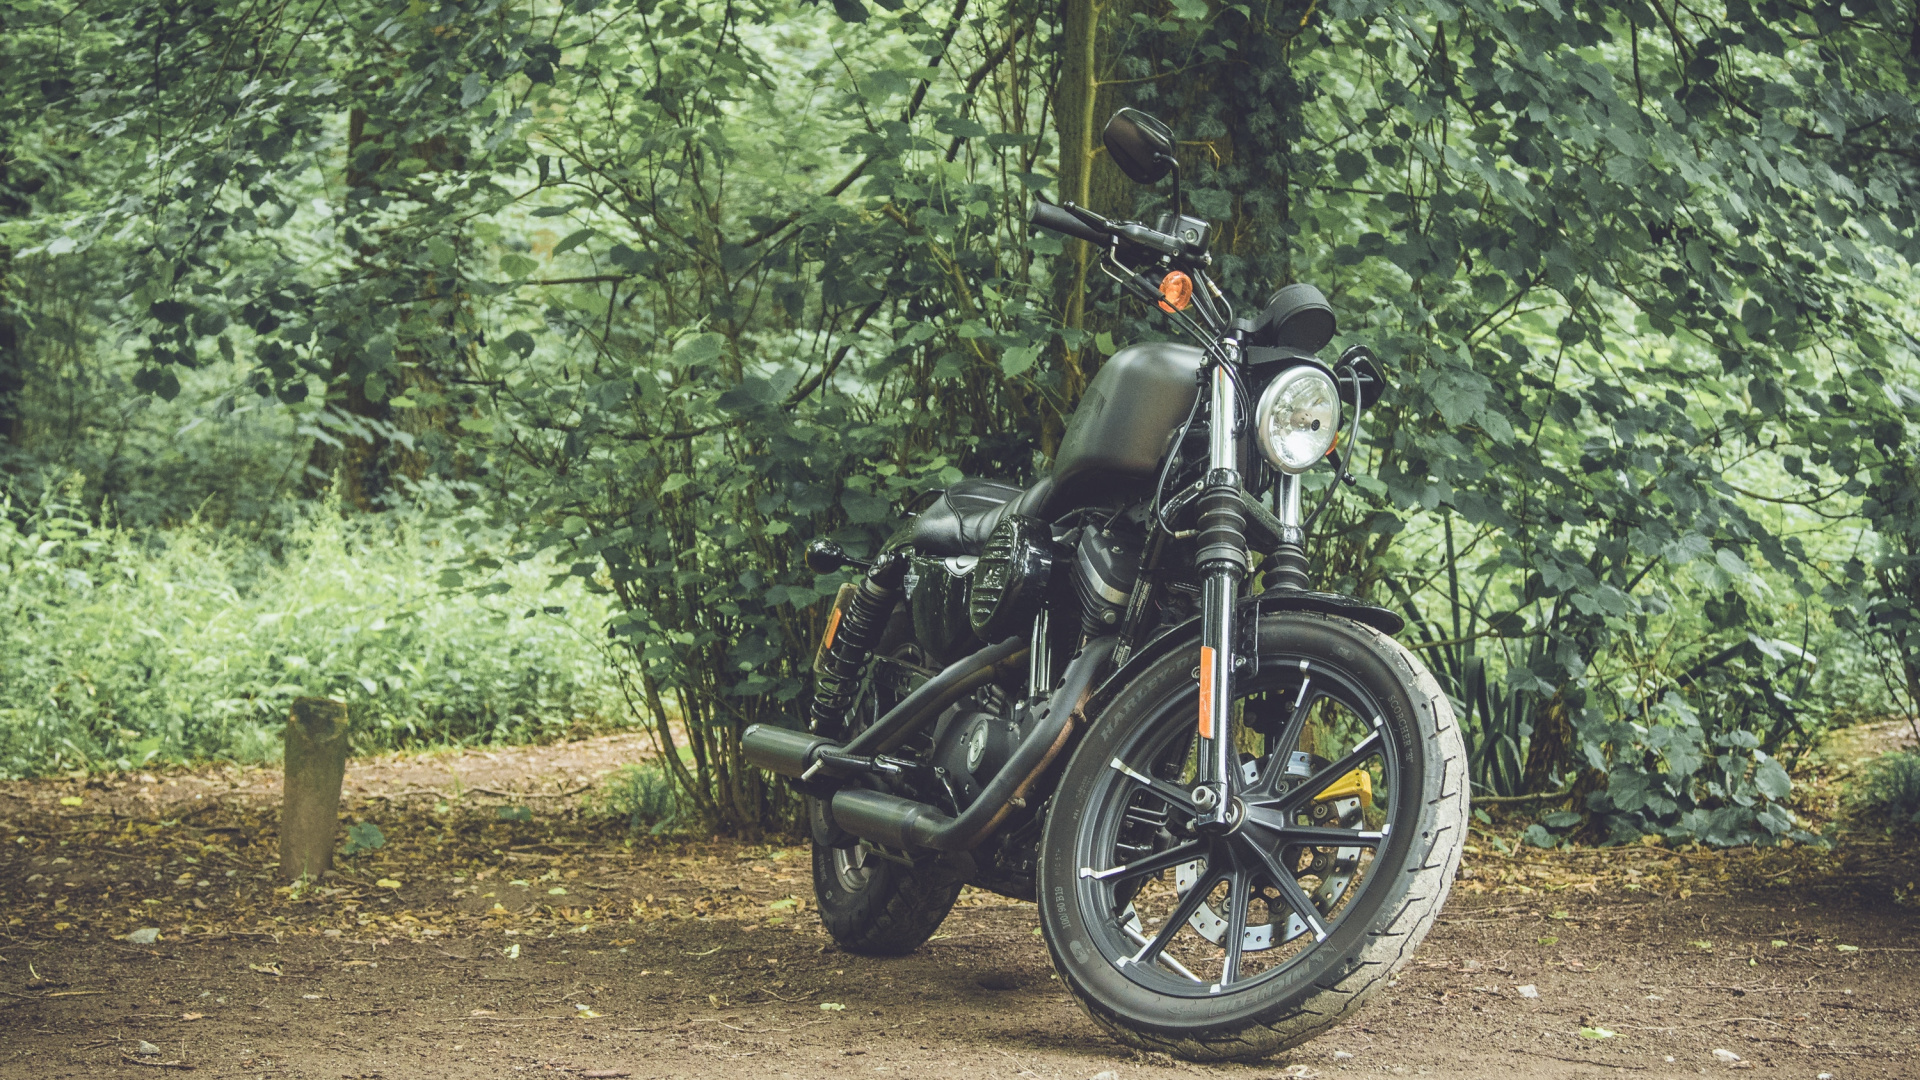 Black Motorcycle Parked on Dirt Road in Between Green Trees During Daytime. Wallpaper in 1920x1080 Resolution